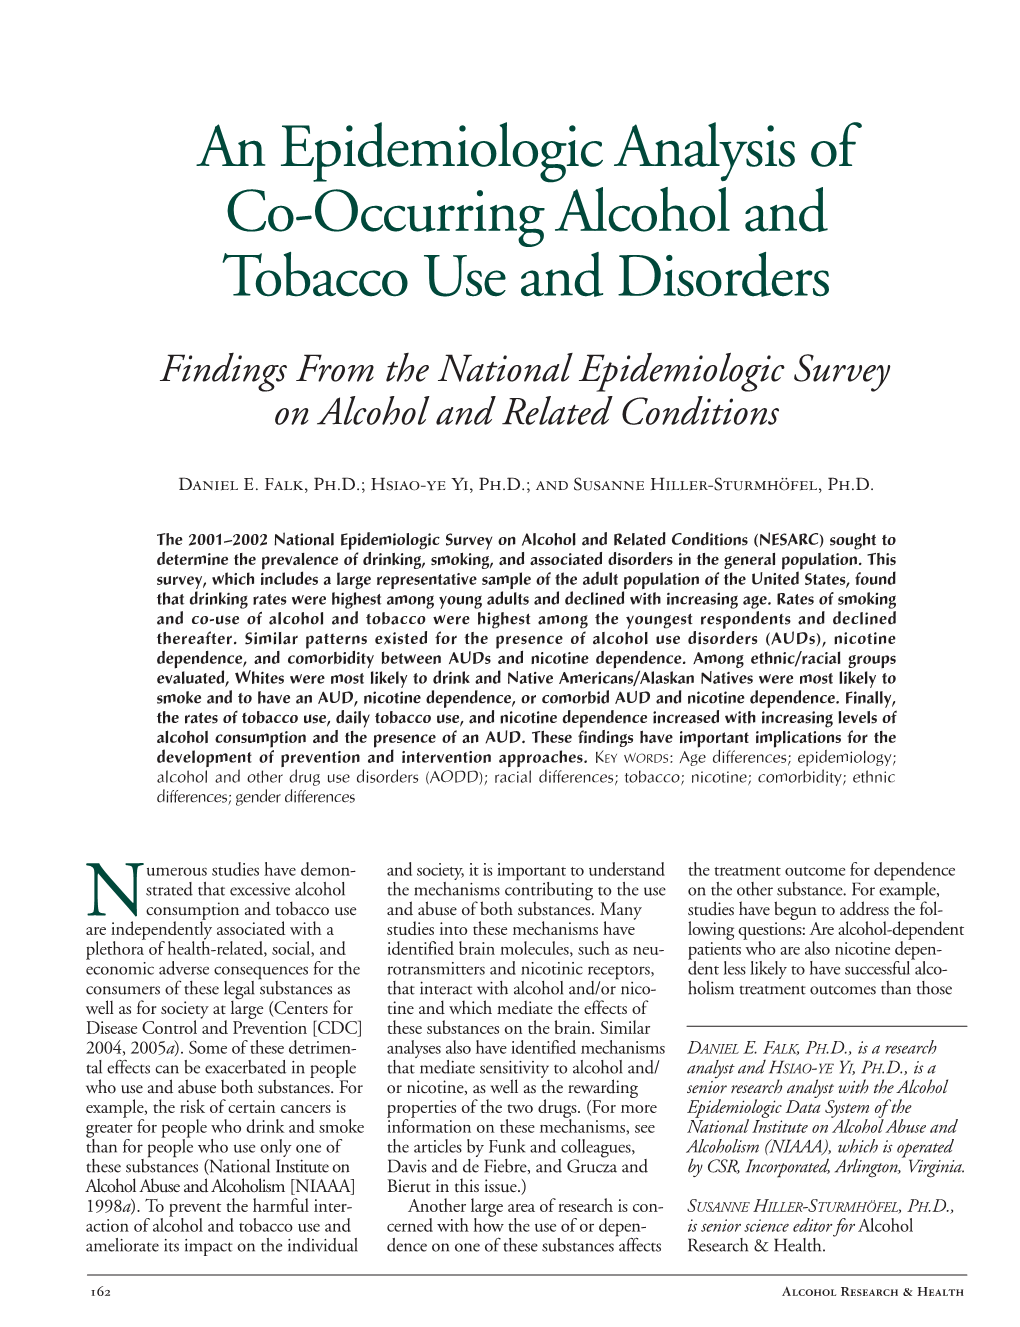 An Epidemiologic Analysis of Co-Occurring Alcohol and Tobacco Use and Disorders